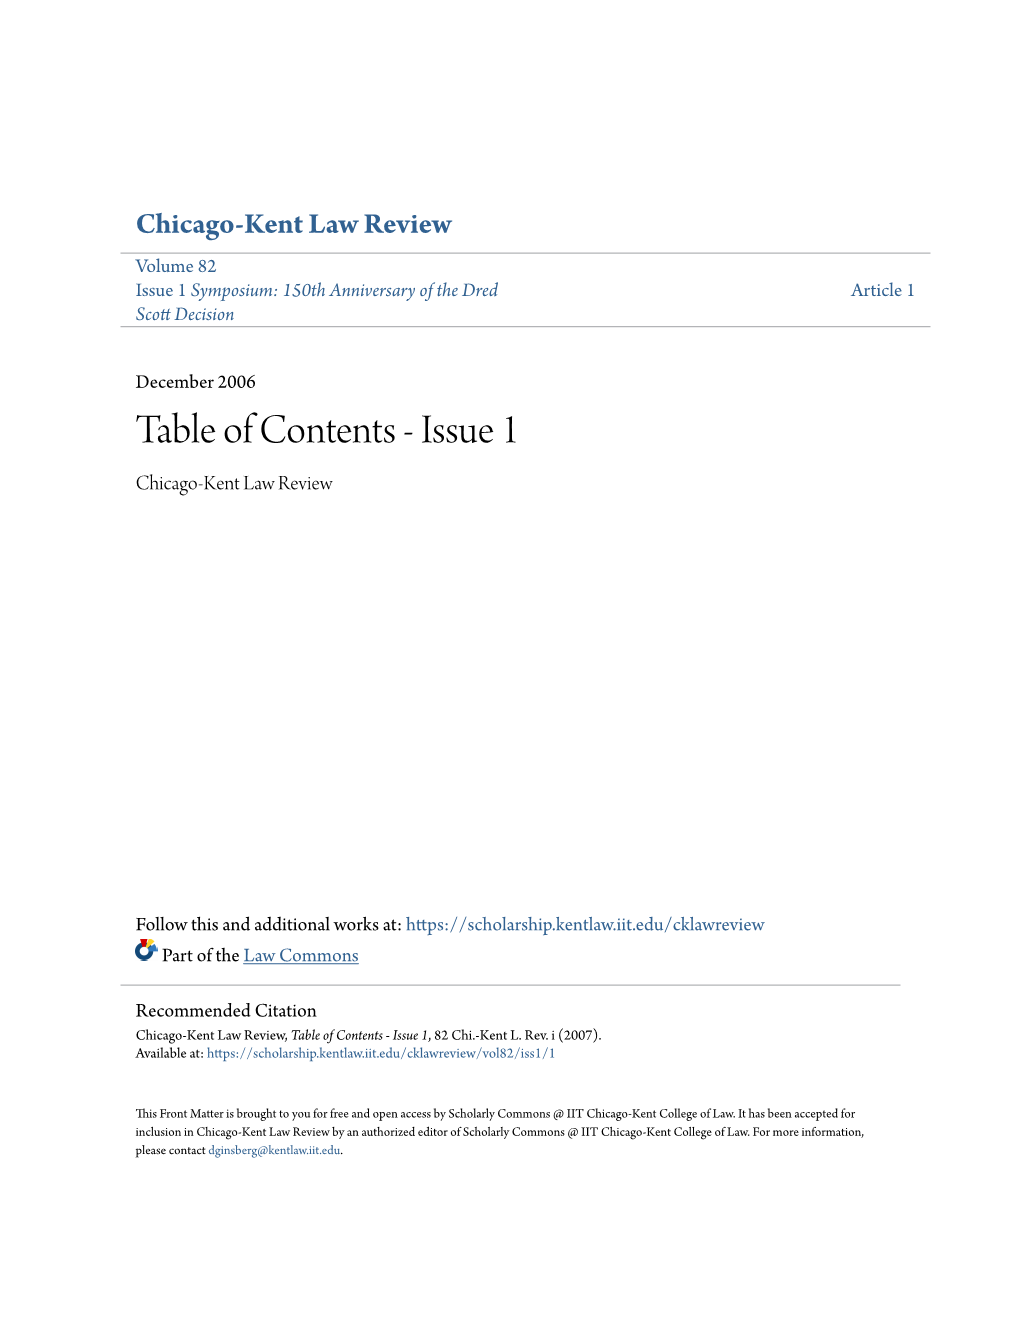 Table of Contents - Issue 1 Chicago-Kent Law Review